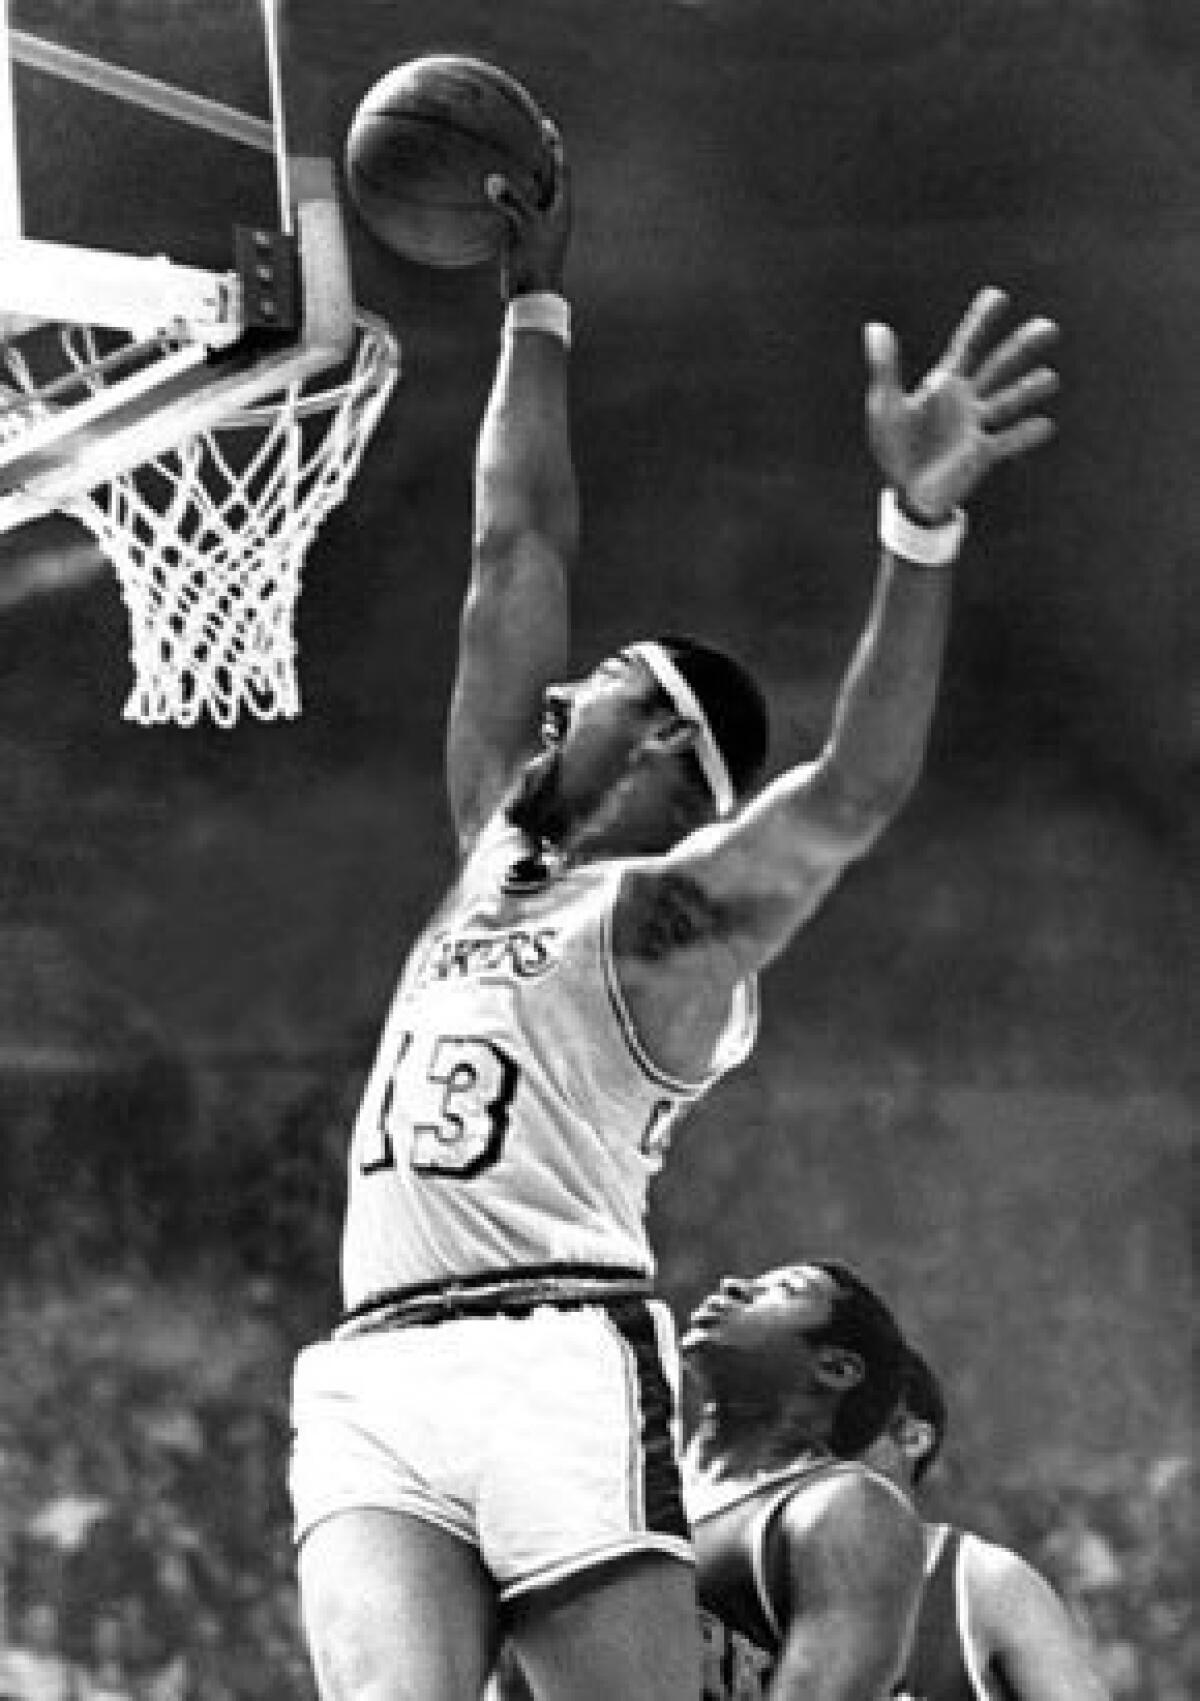 Wilt Chamberlain averaged a Los Angeles franchise-record 21.1 rebounds during his first season with the team in 1968-69. It was just the opening act.